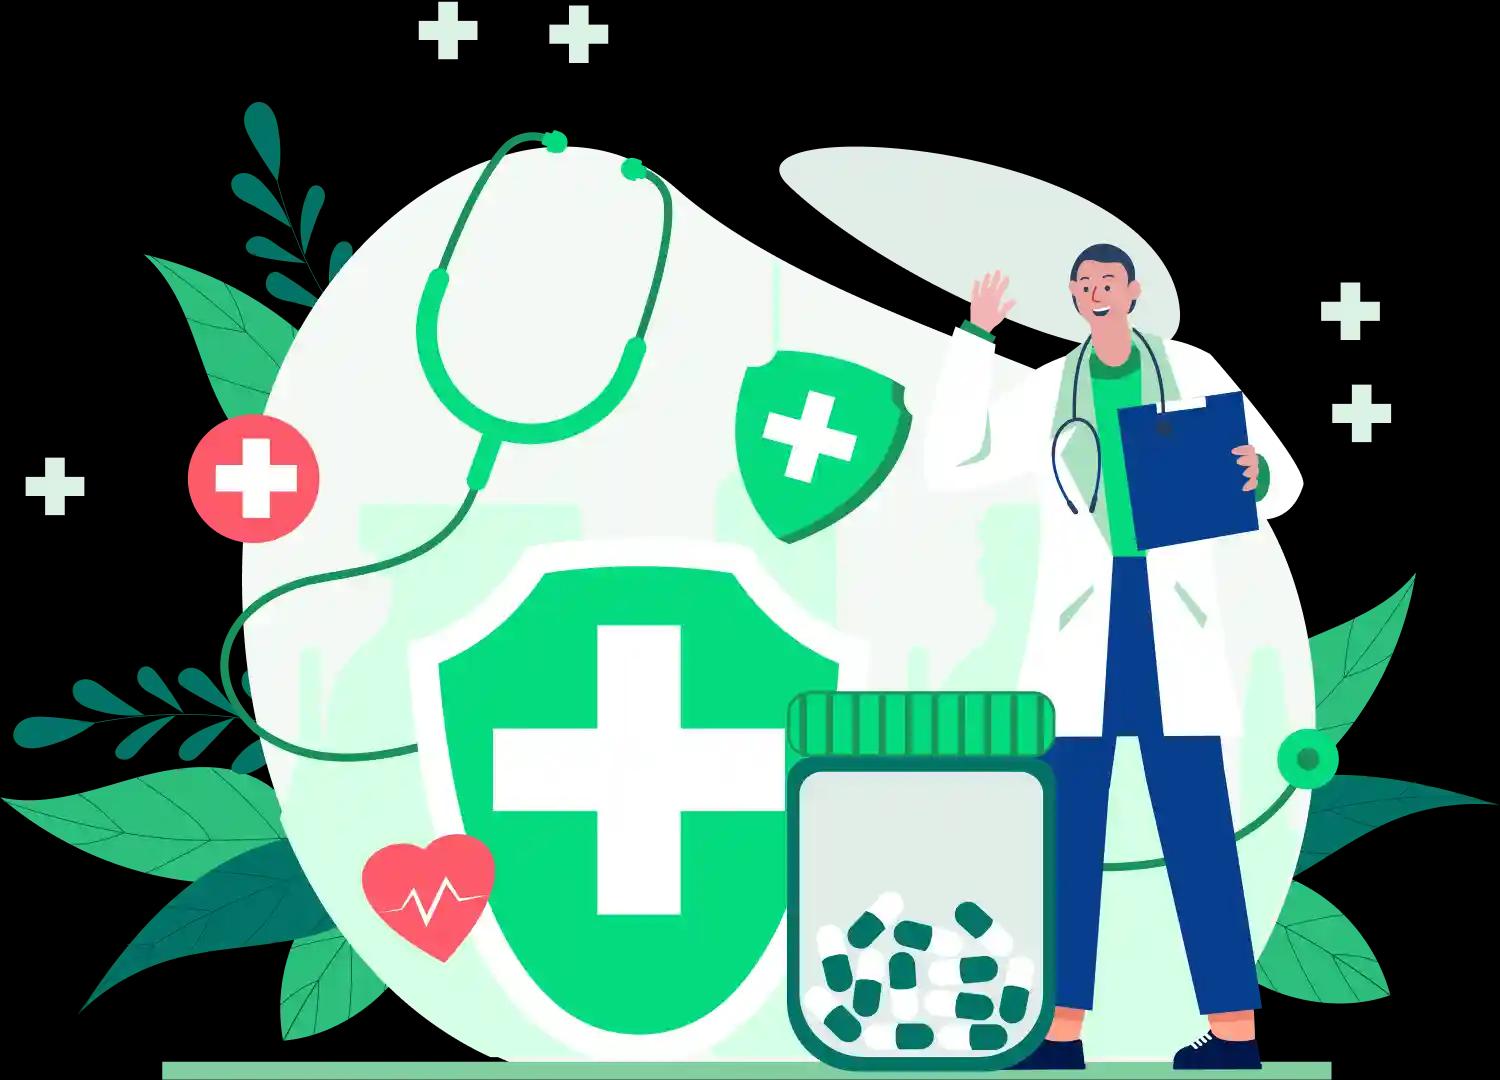 A medical professional with a stethoscope standing confidently beside a health shield icon and pill bottle, conveying professional indemnity insurance for healthcare providers.